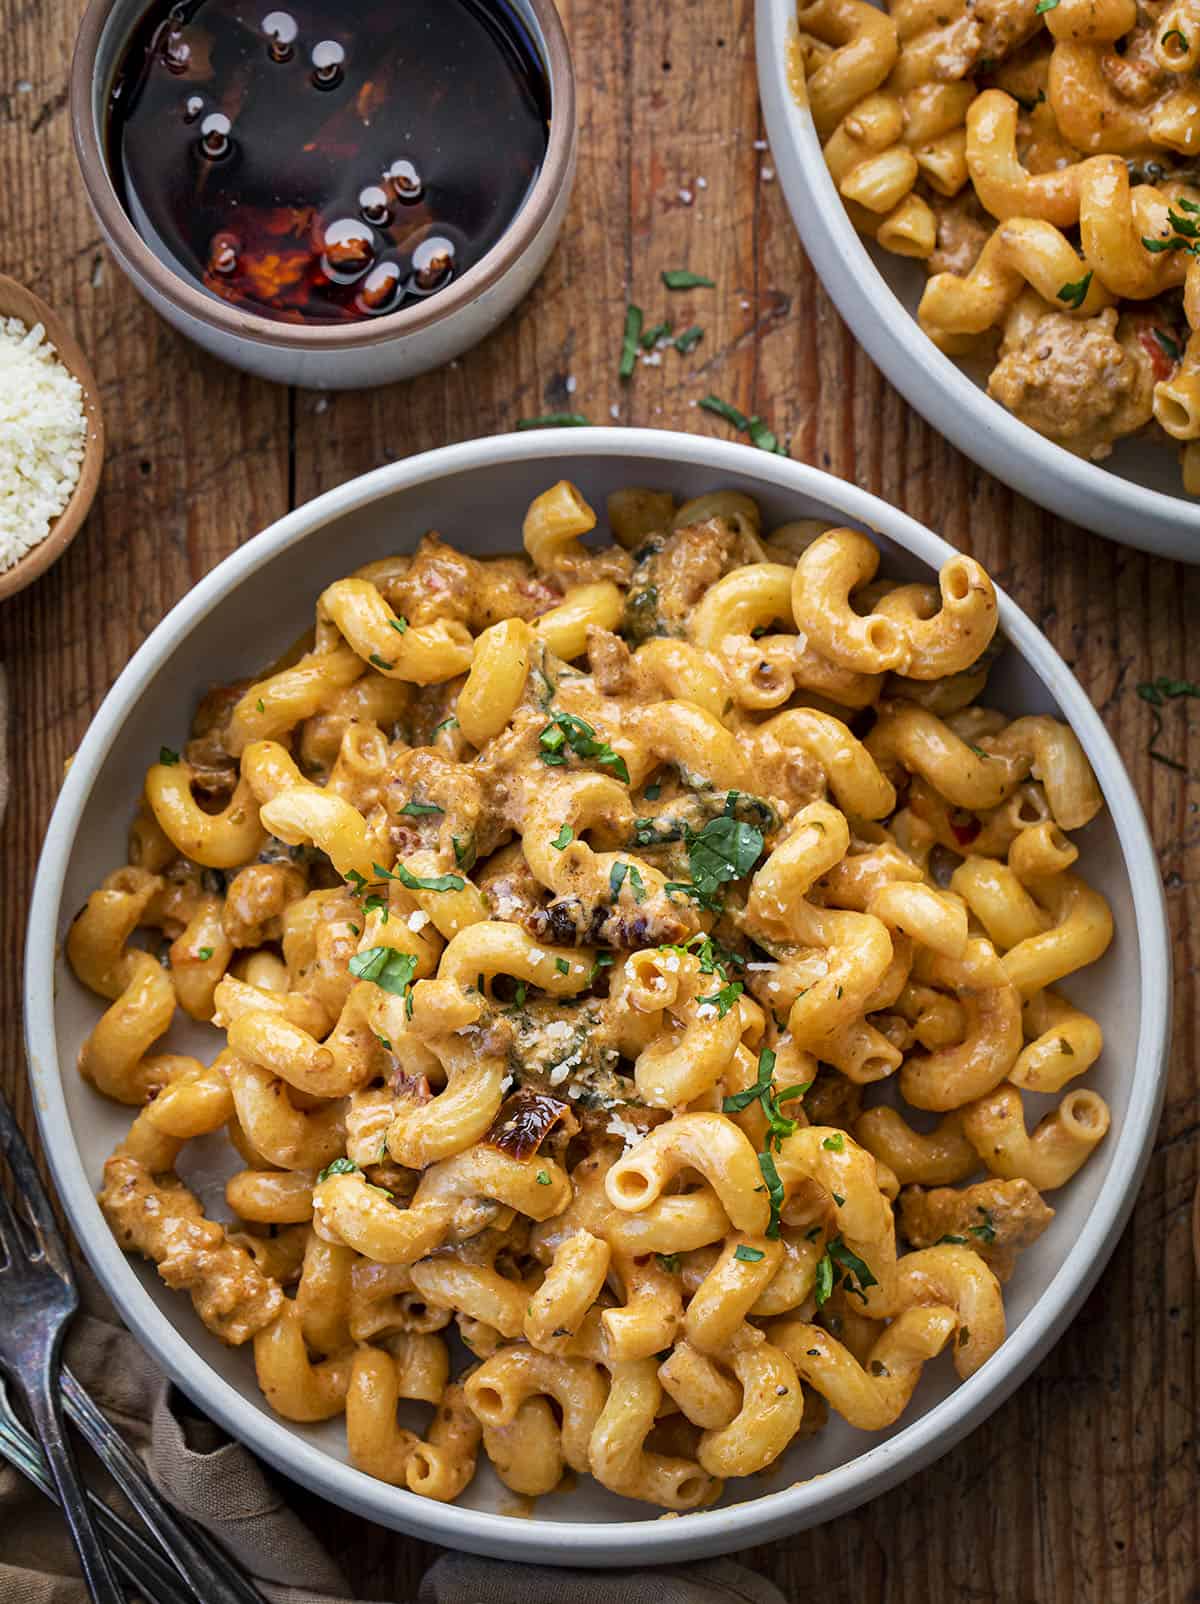 Bowls of Spicy Sausage Cavatappi on a Cutting Board with Parmesan and Sundried Tomatoes. Dinner, Supper, Spicy Sausage Recipes, Dinner Recipes, Best Pasta Recipes, Pasta, Whats for Dinner, recipes, i am homesteader, iamhomesteader, viral tiktok